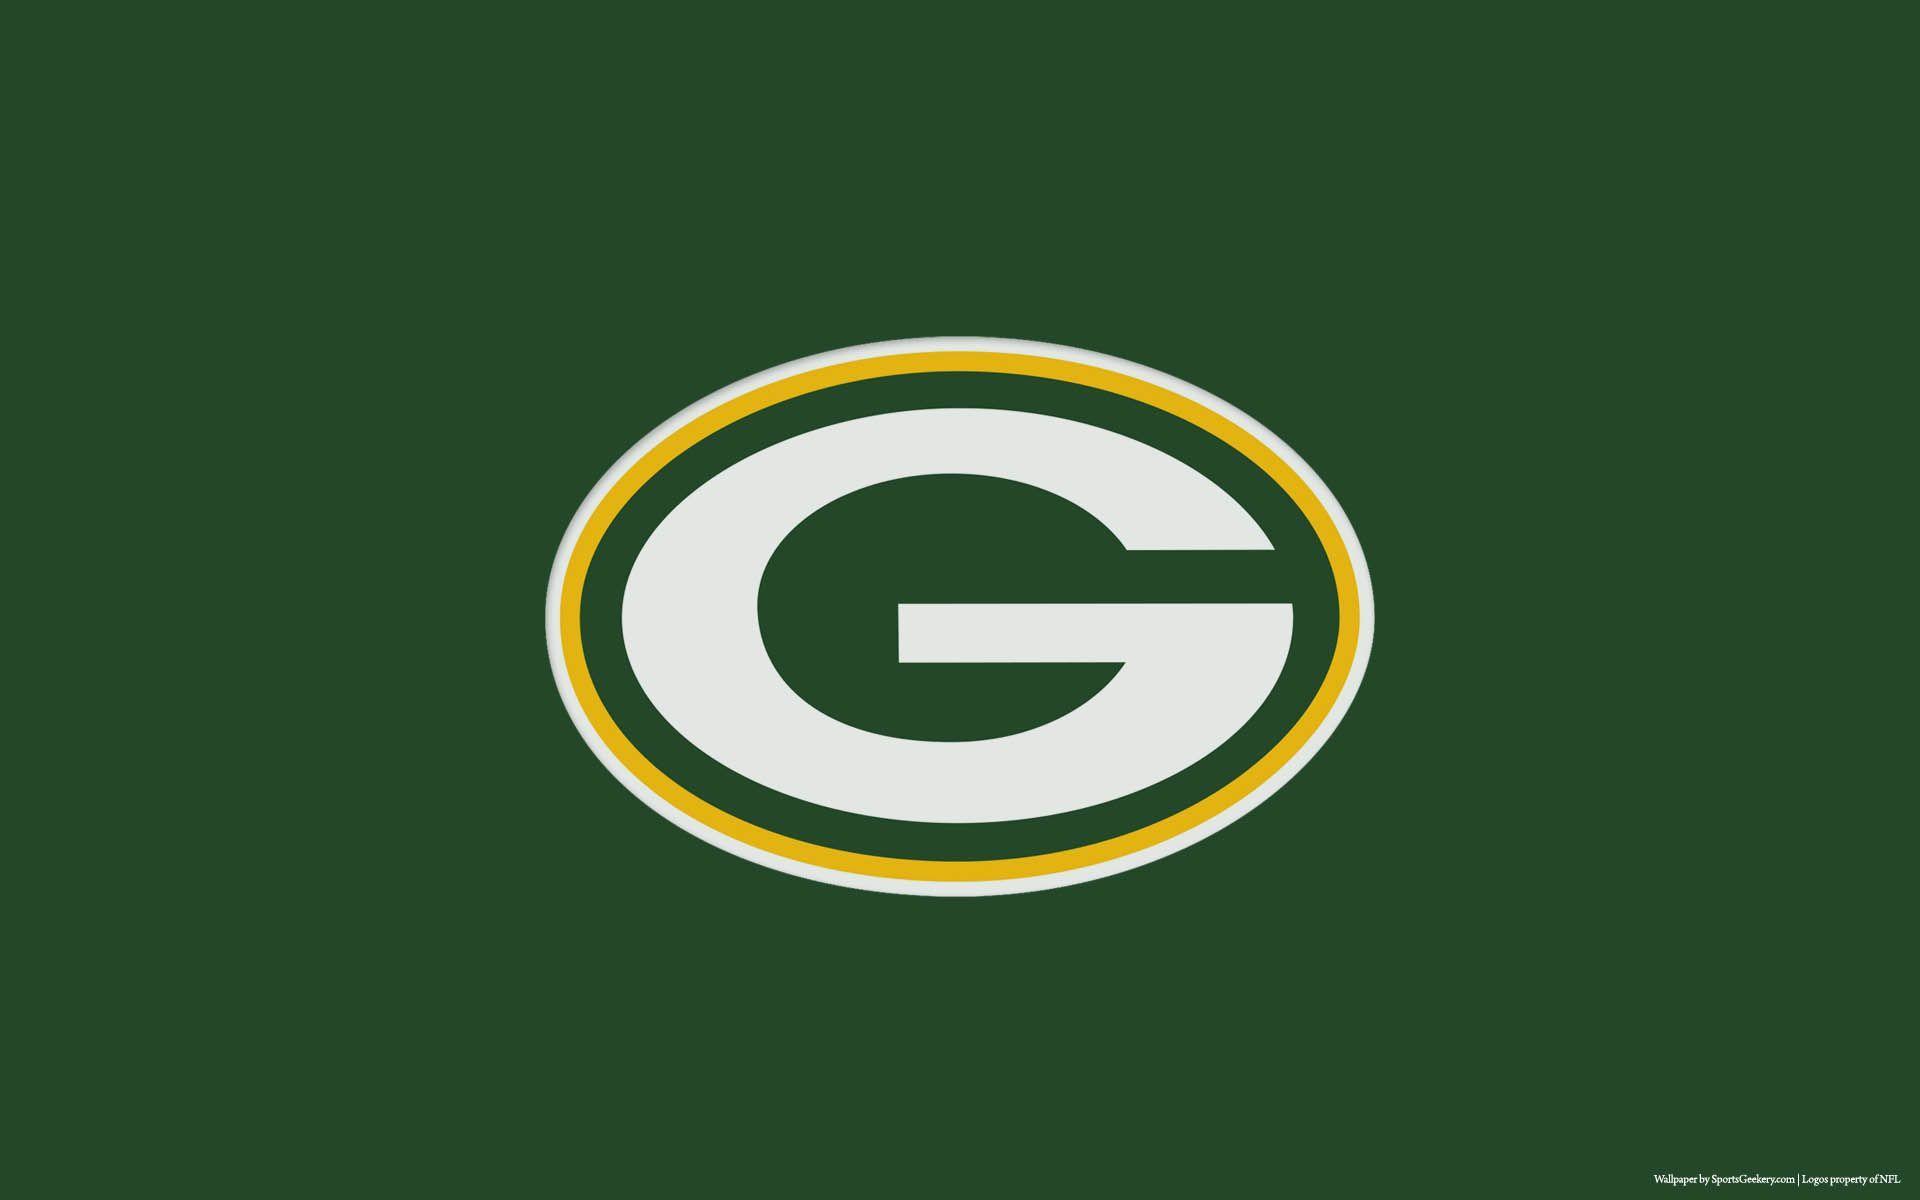 Showing posts & media for Nfl packers logo wallpaper